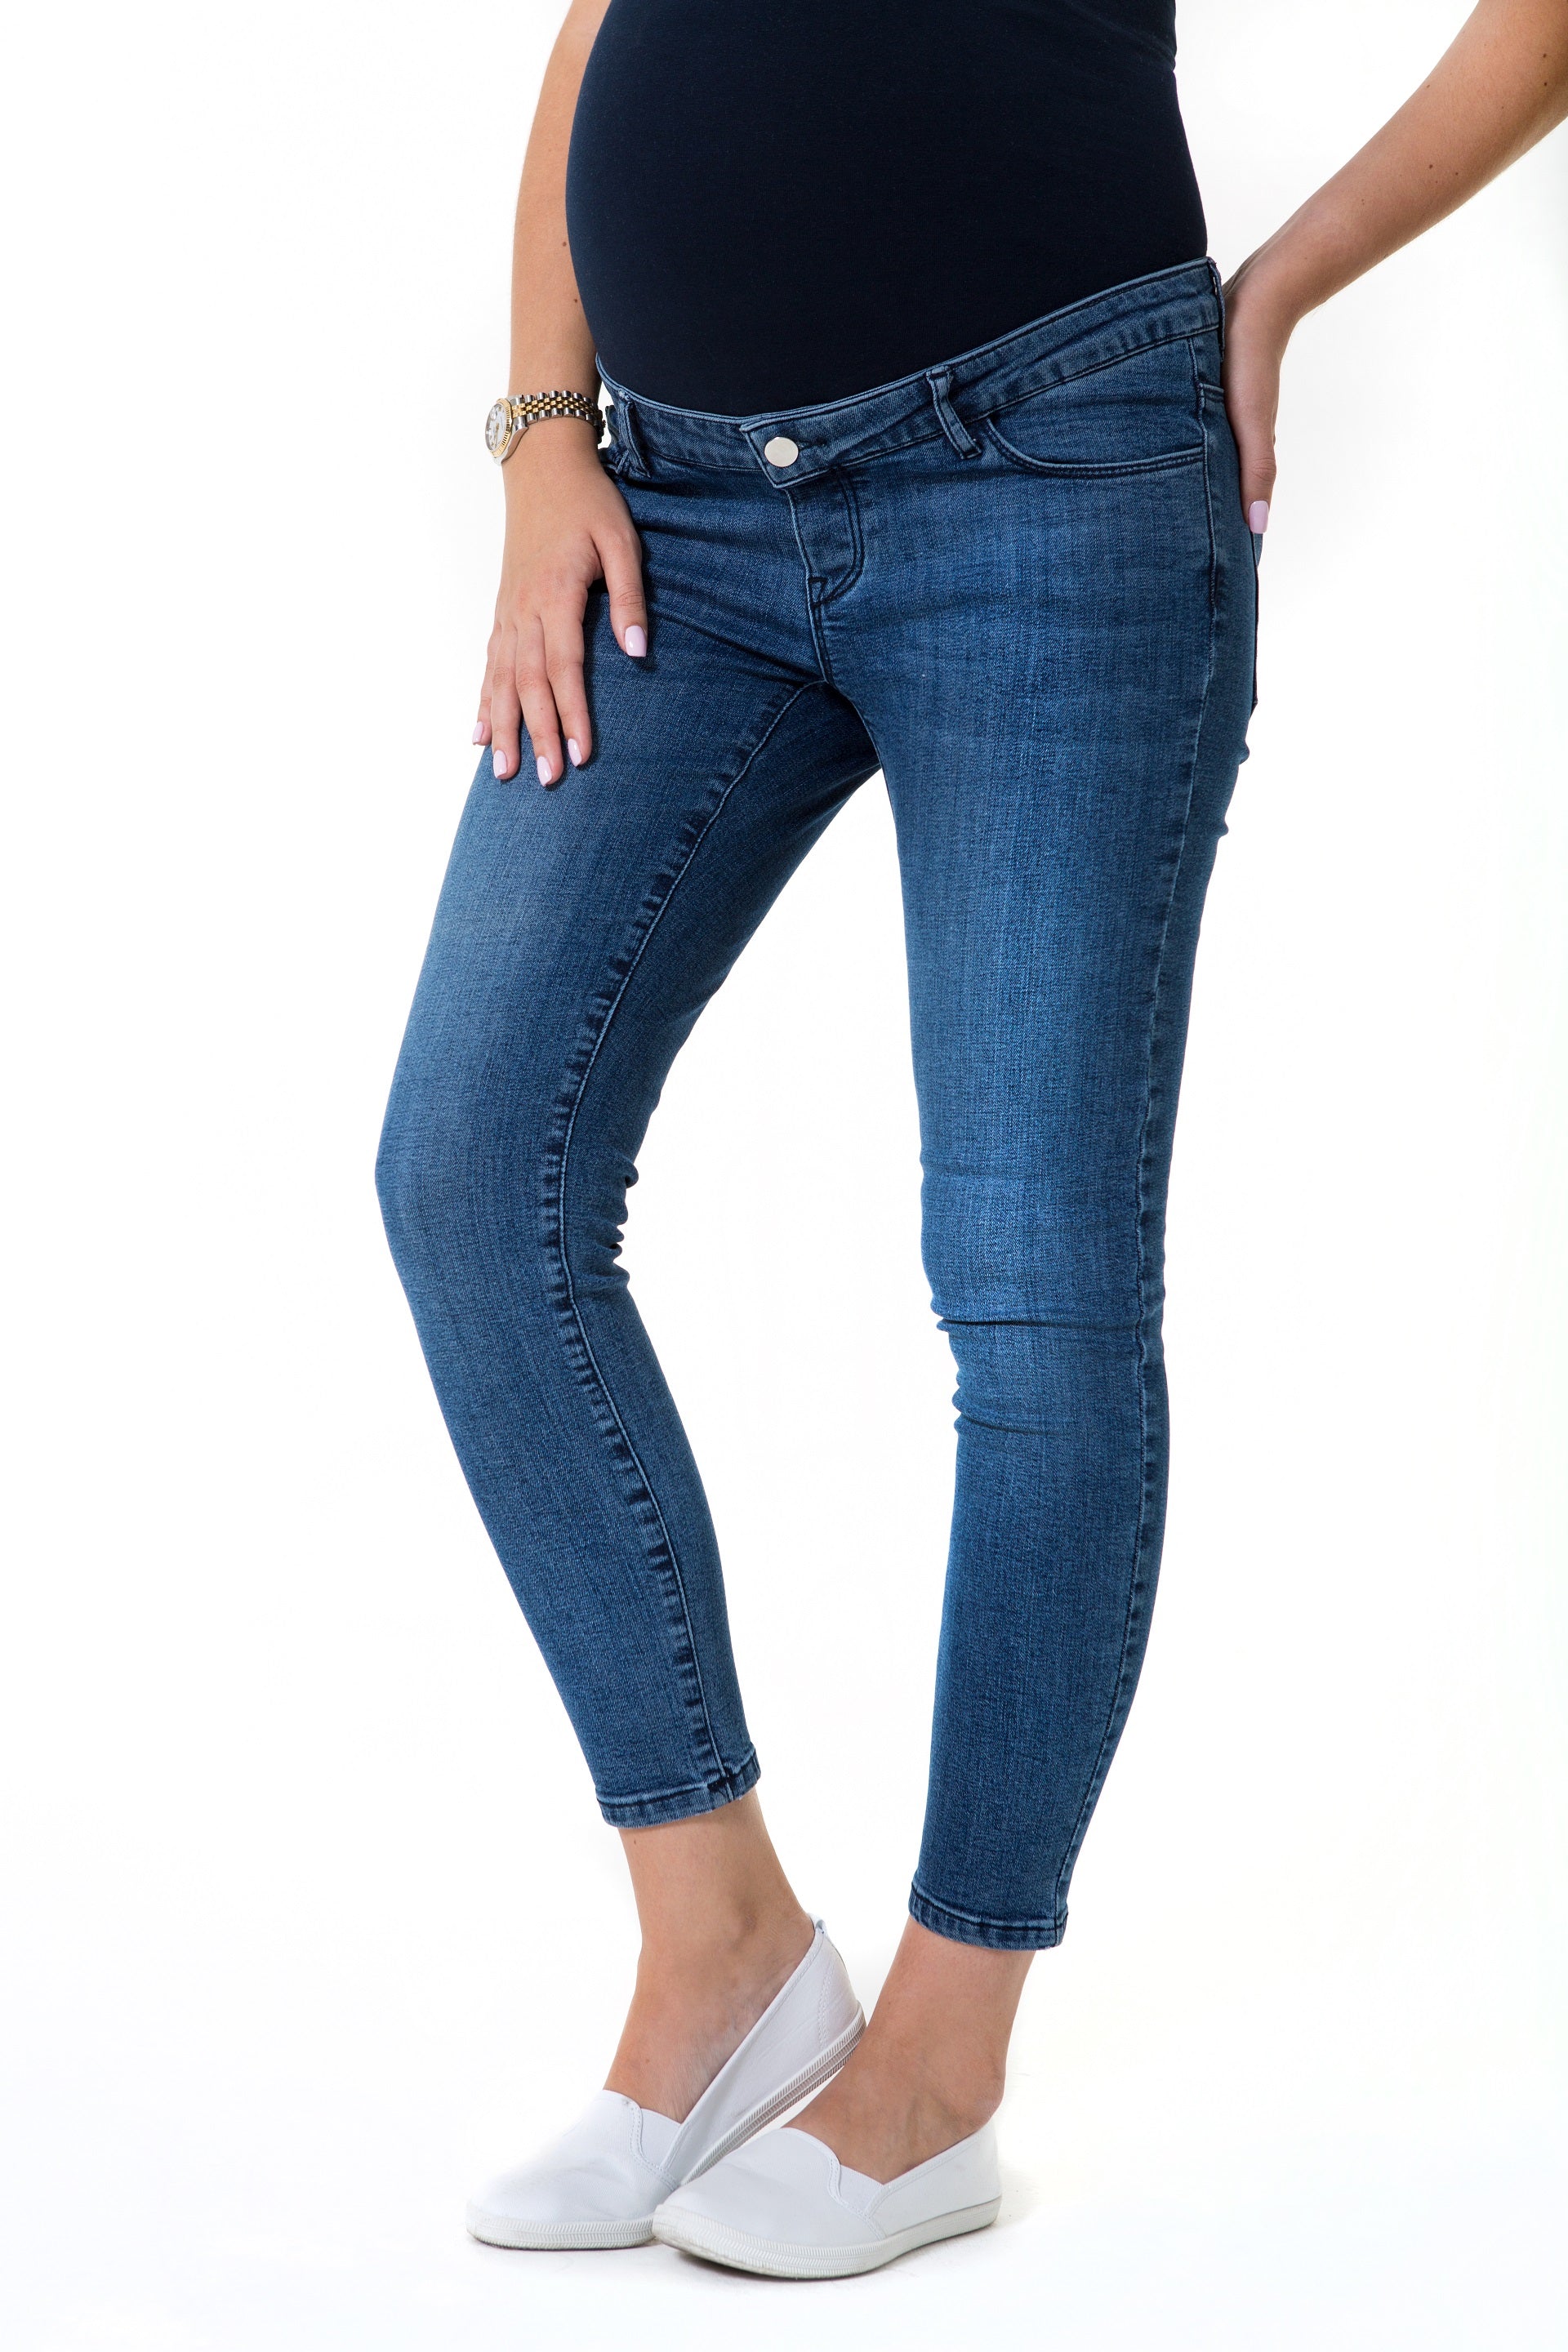 Skinny Foldover Waistband Maternity Jeans – Accouchée Official